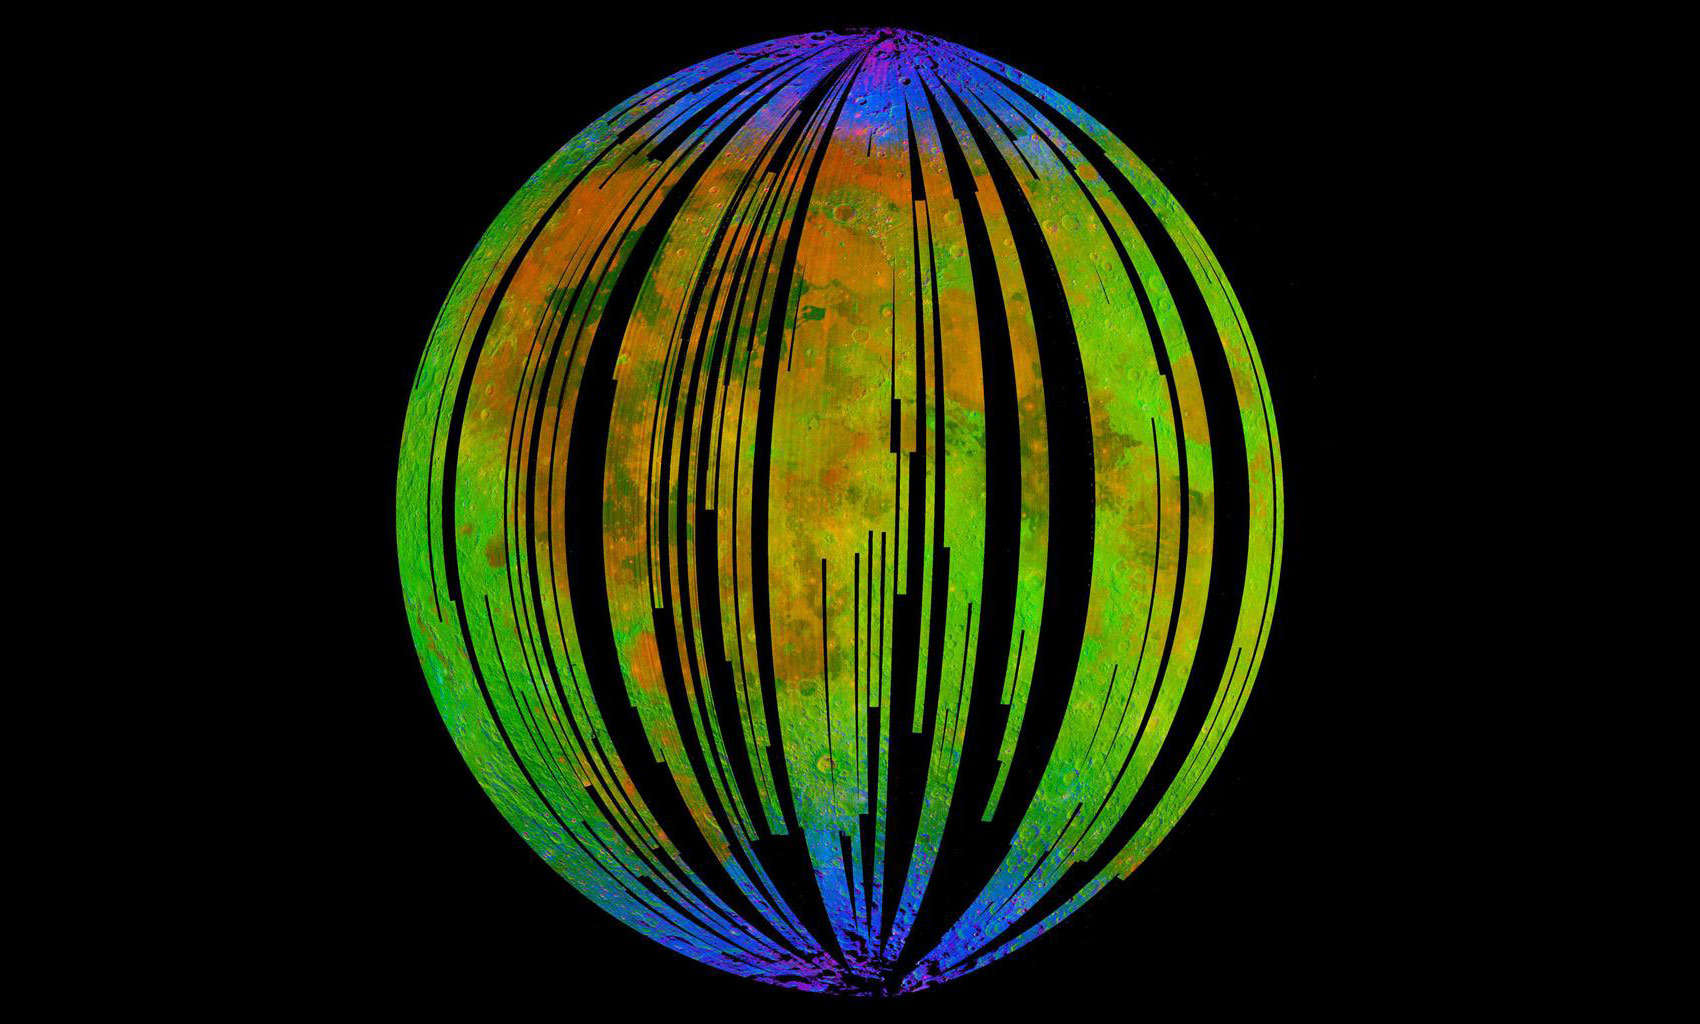 Chandrayaan-1’s Moon Mineralogy Mapper observes the Moon in strips, and the colors here represent different substances: For example water and hydroxyl ions (OH) are blue (note they are near the poles), and pyroxene, an iron-bearing mineral, is red.